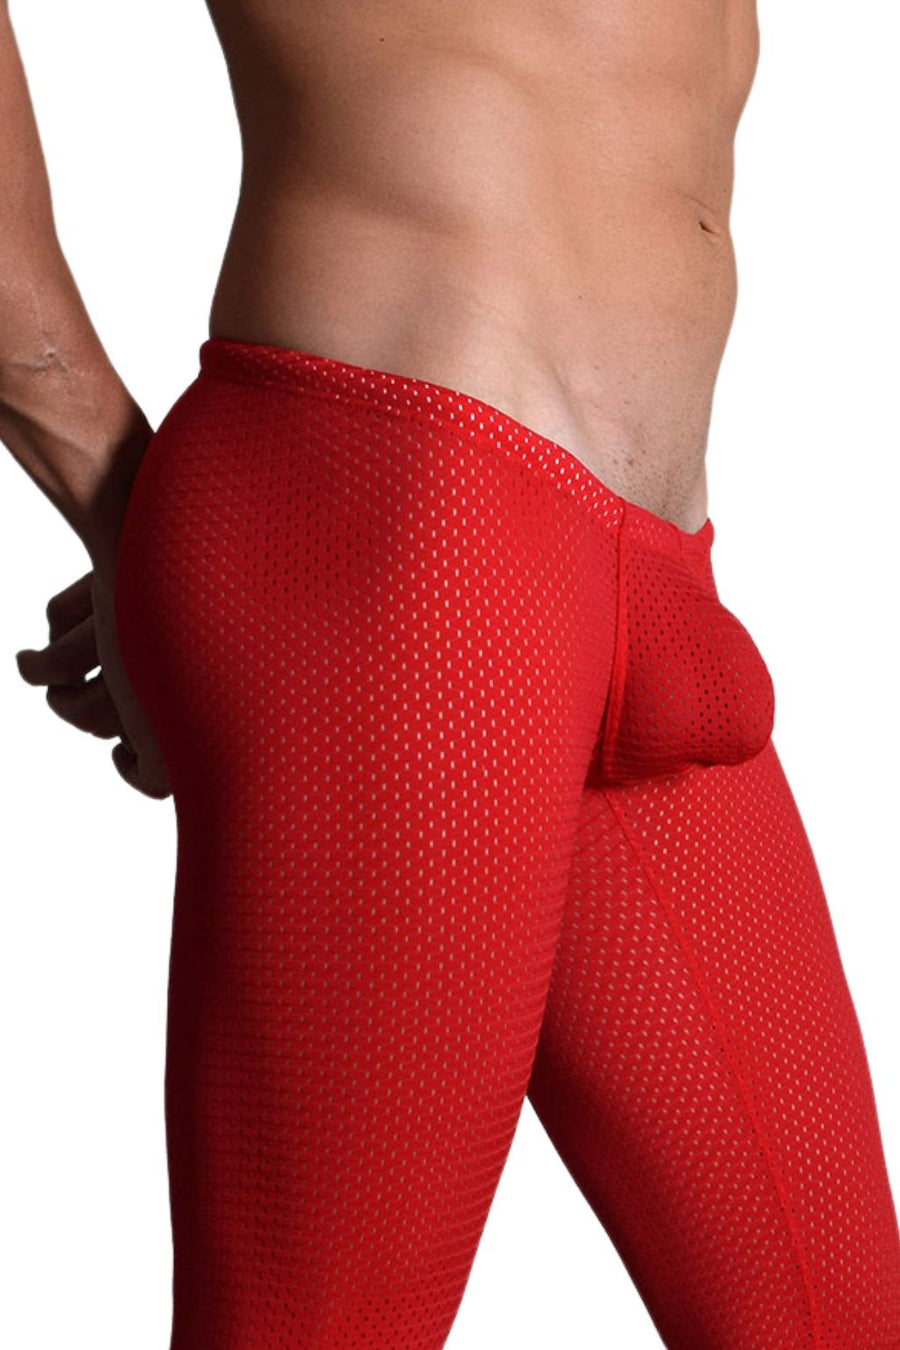 BfM Mens Lowrise Eyelet Tights - Original Pouch